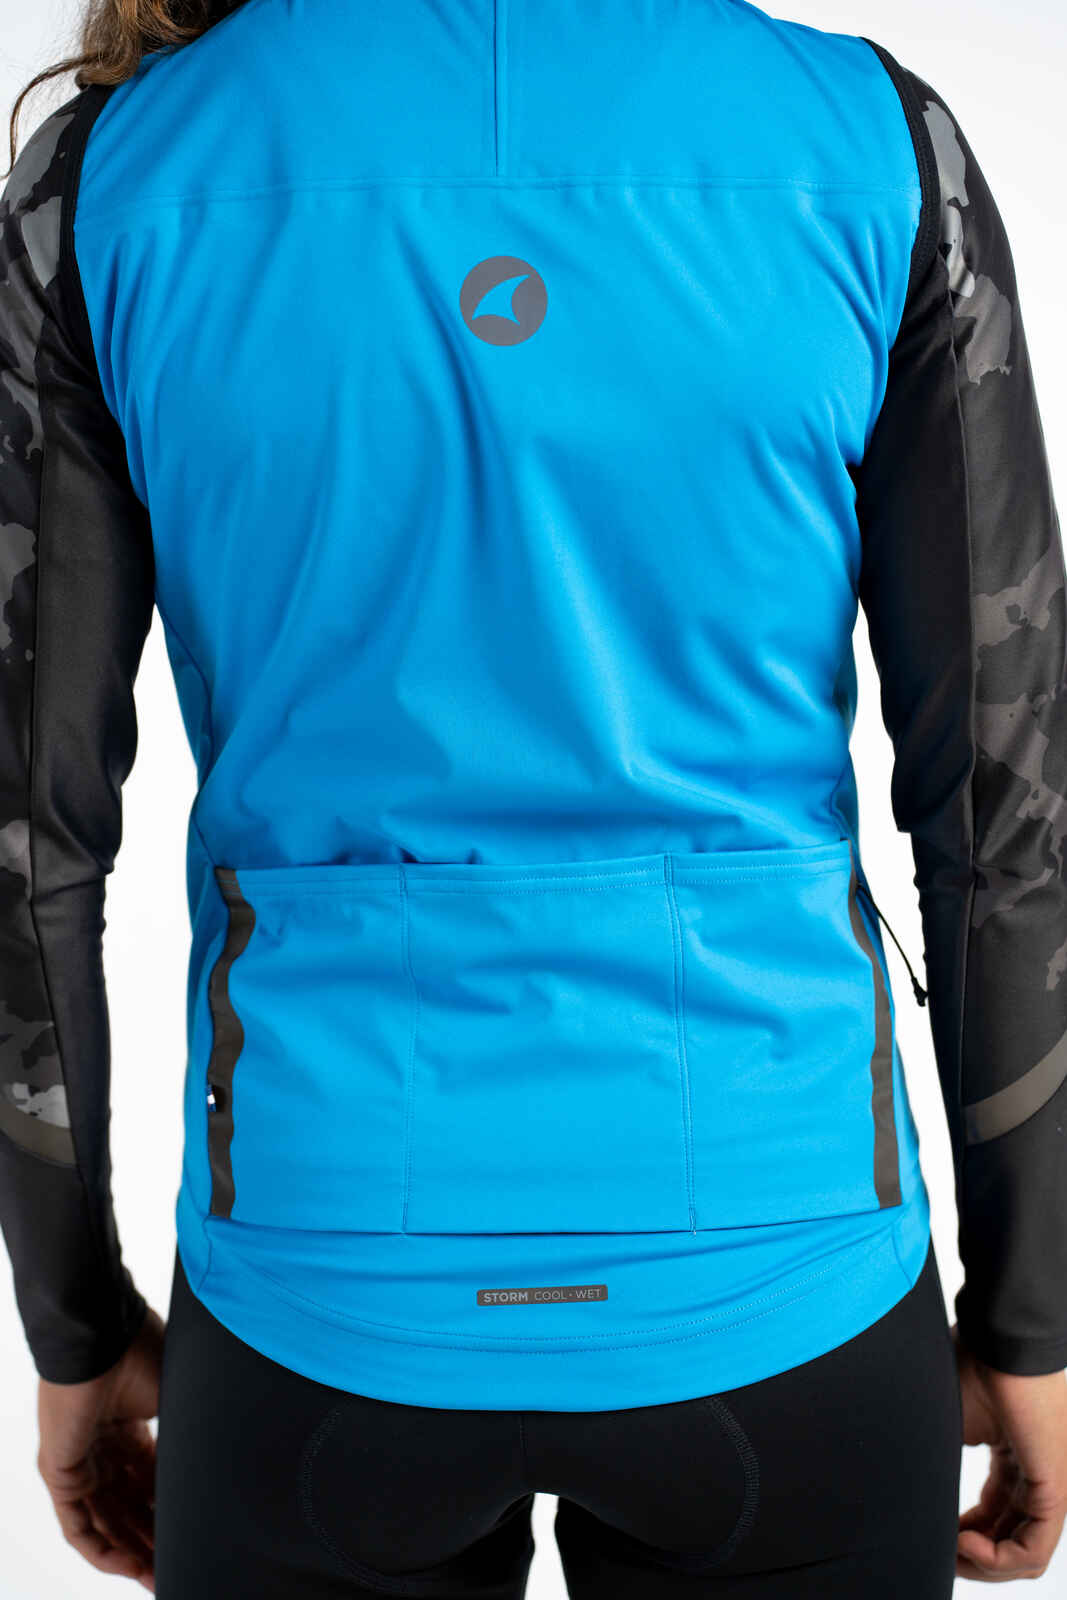 Women's Blue Water Repellent Cycling Vest - Back Pockets